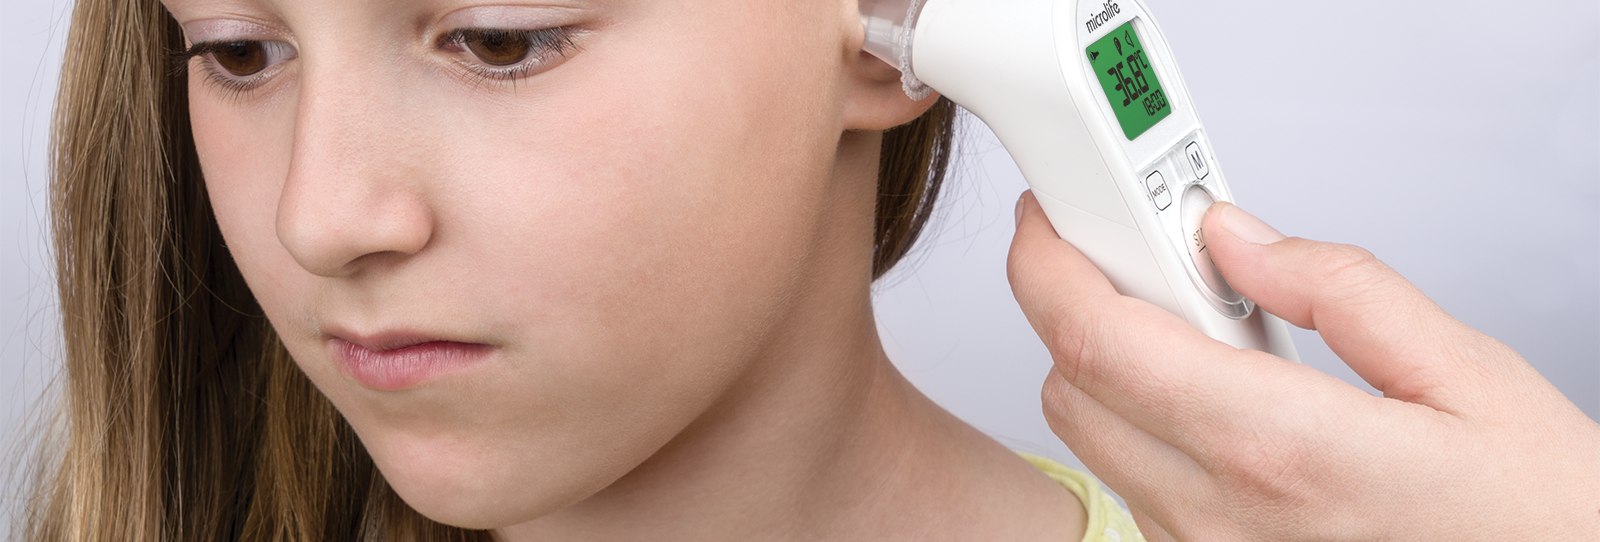 Superfast and accurate measurement of the ear temperature in only 1 second.